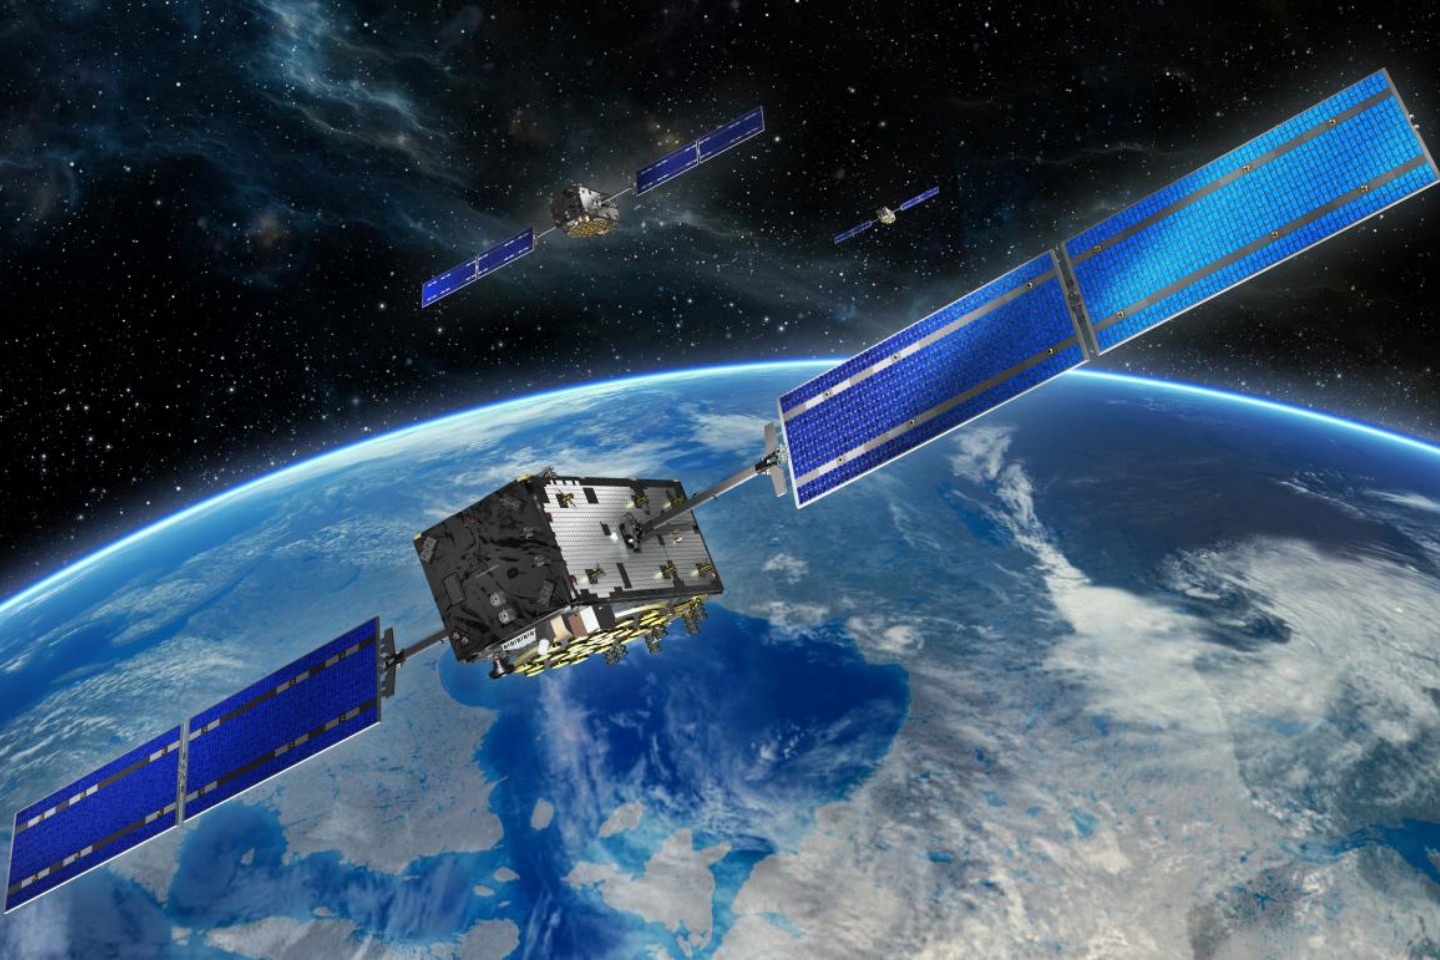 GPS signals can be delayed on their journey from satellite to Earth by moisture in the troposphere, so measuring delays helps us calculate humidity and rainfall.